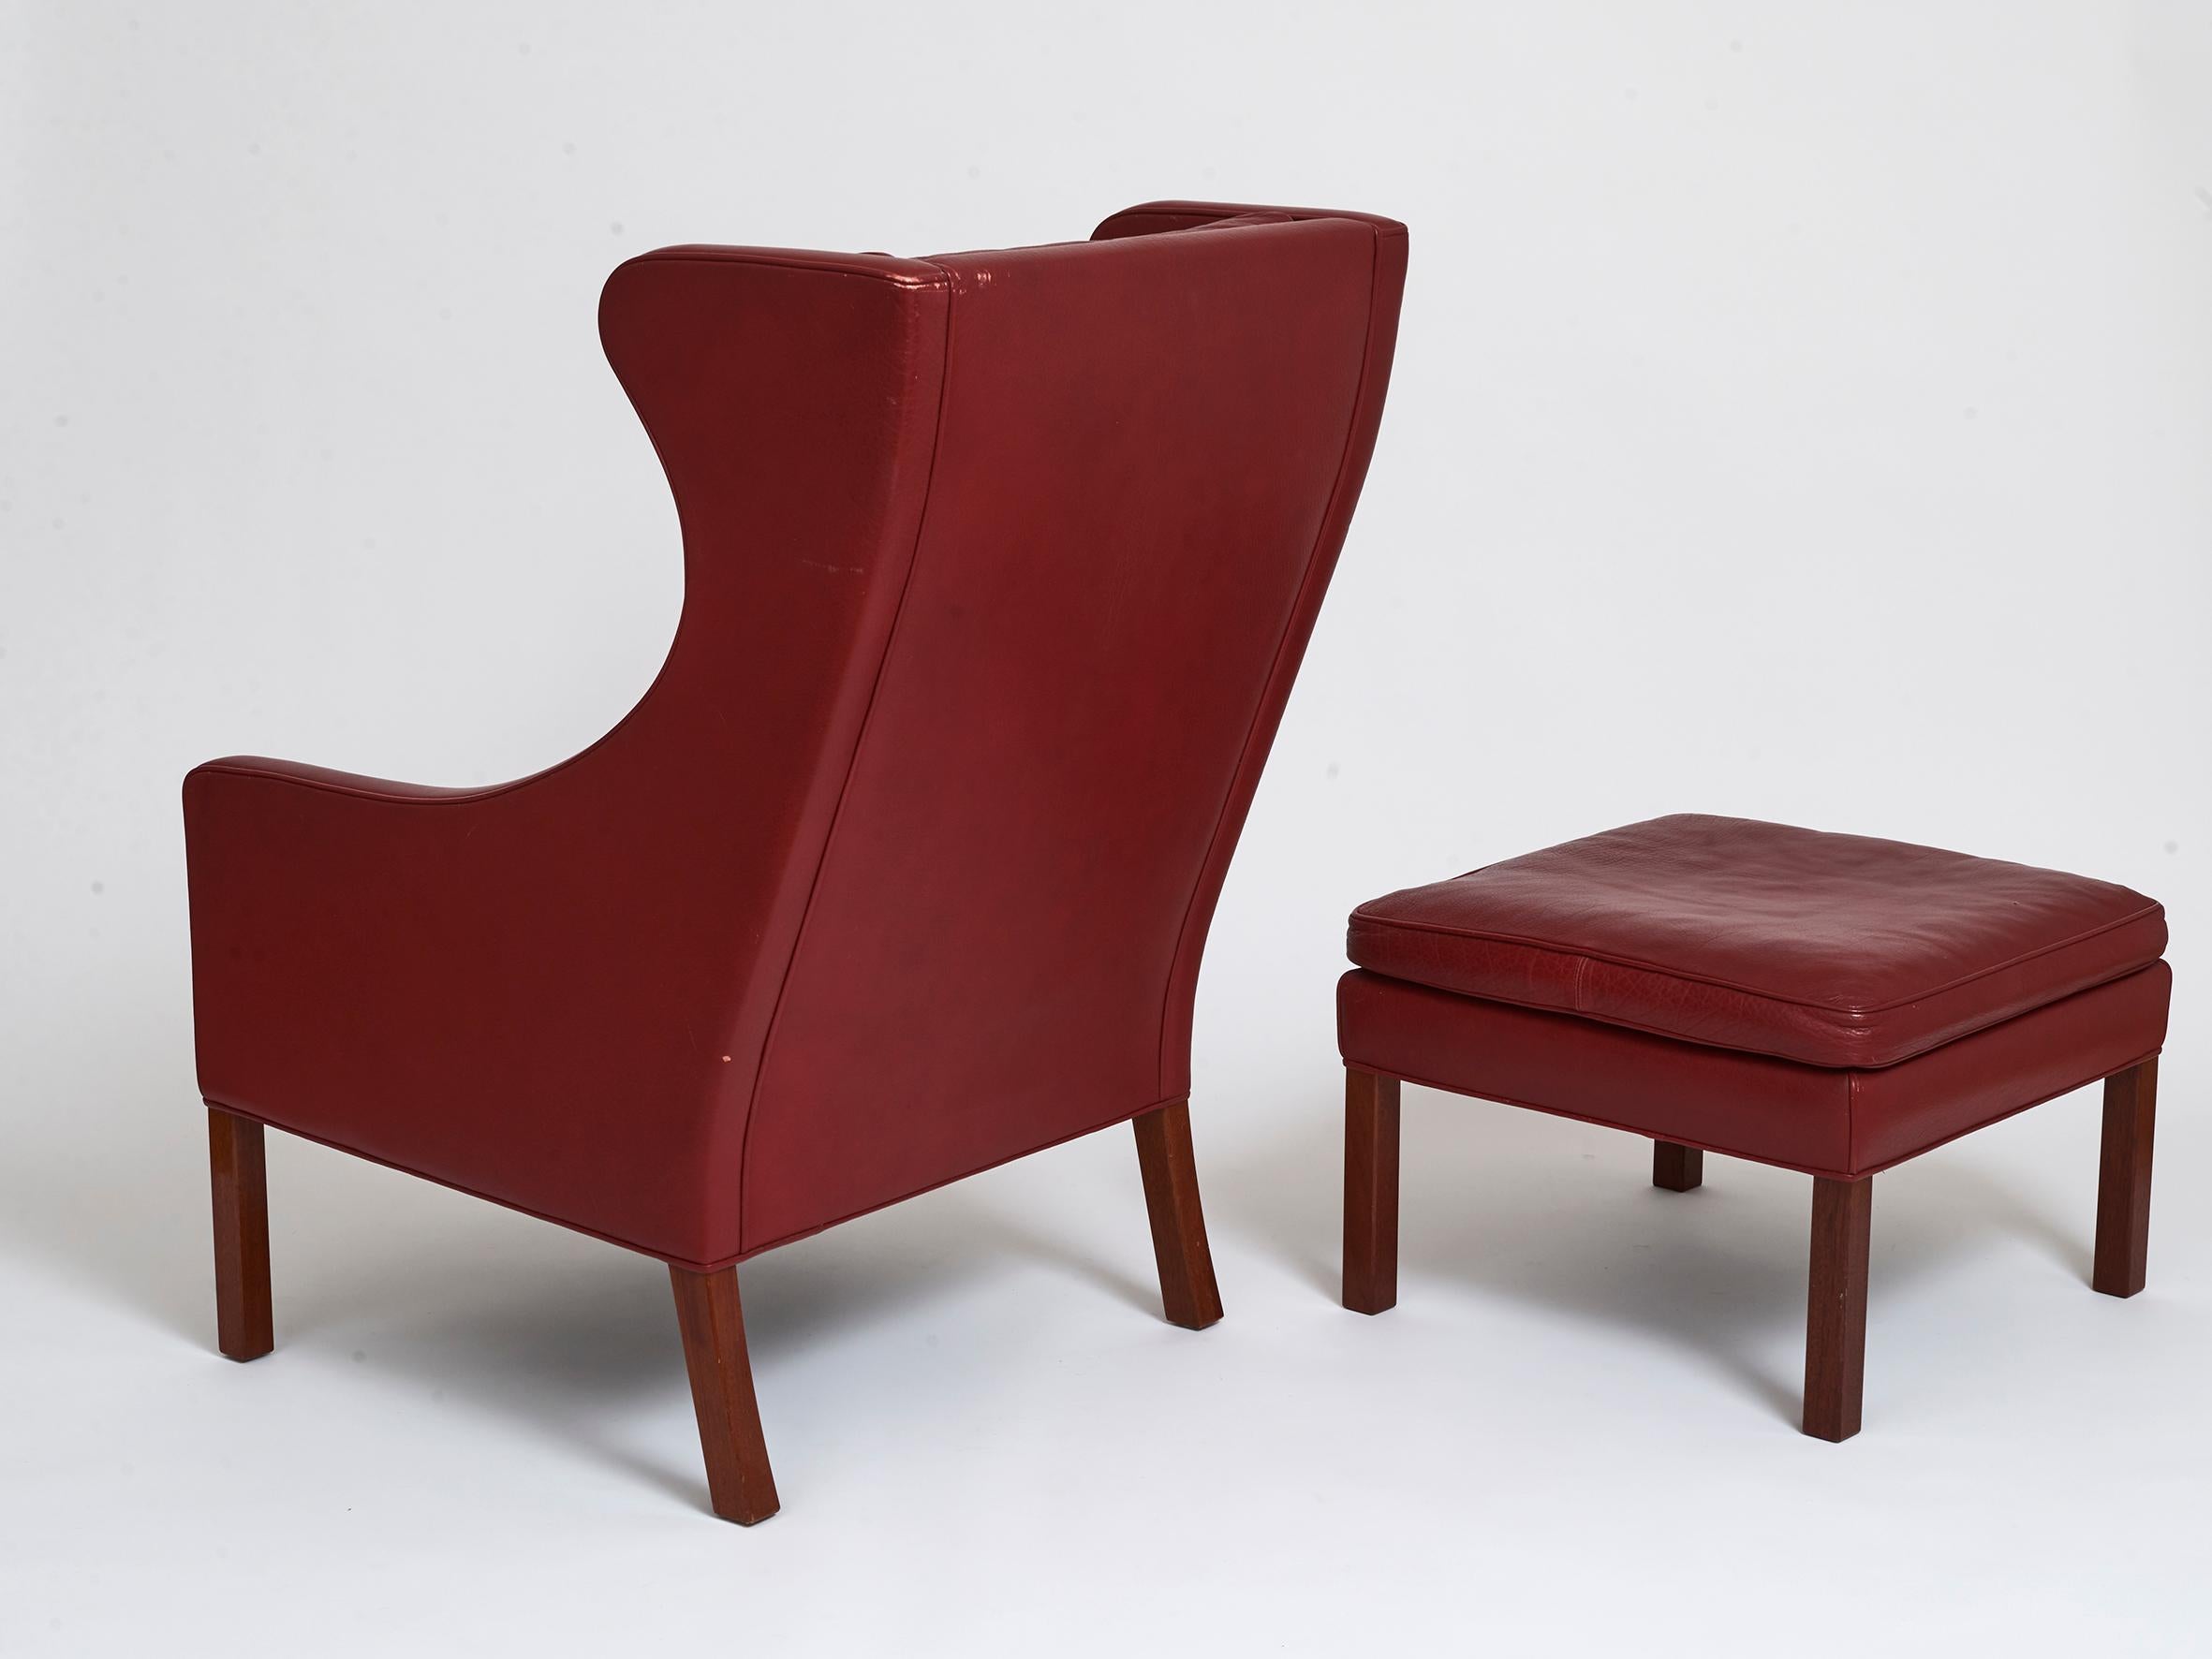 Late 20th Century Børge Mogensen Lounge Chair 2204 and Footstool 2202